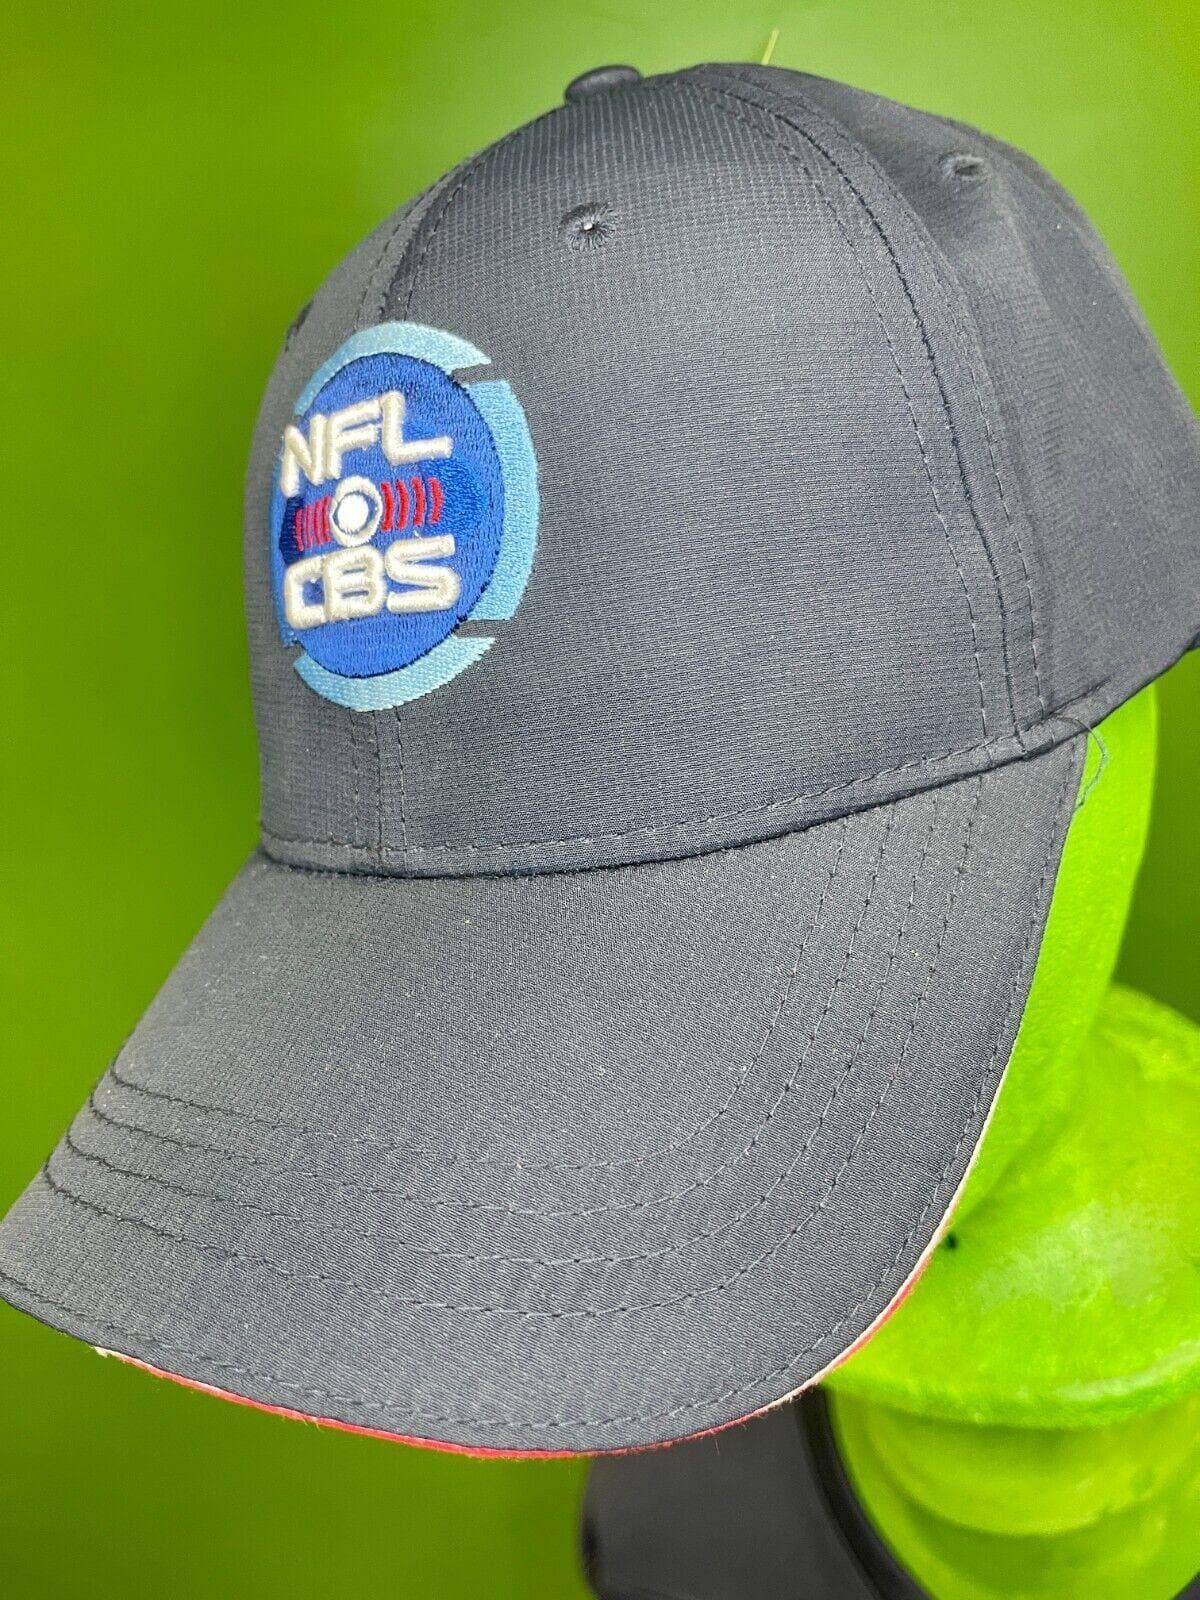 NFL on CBS Baseball Hat Cap One Size Fits All